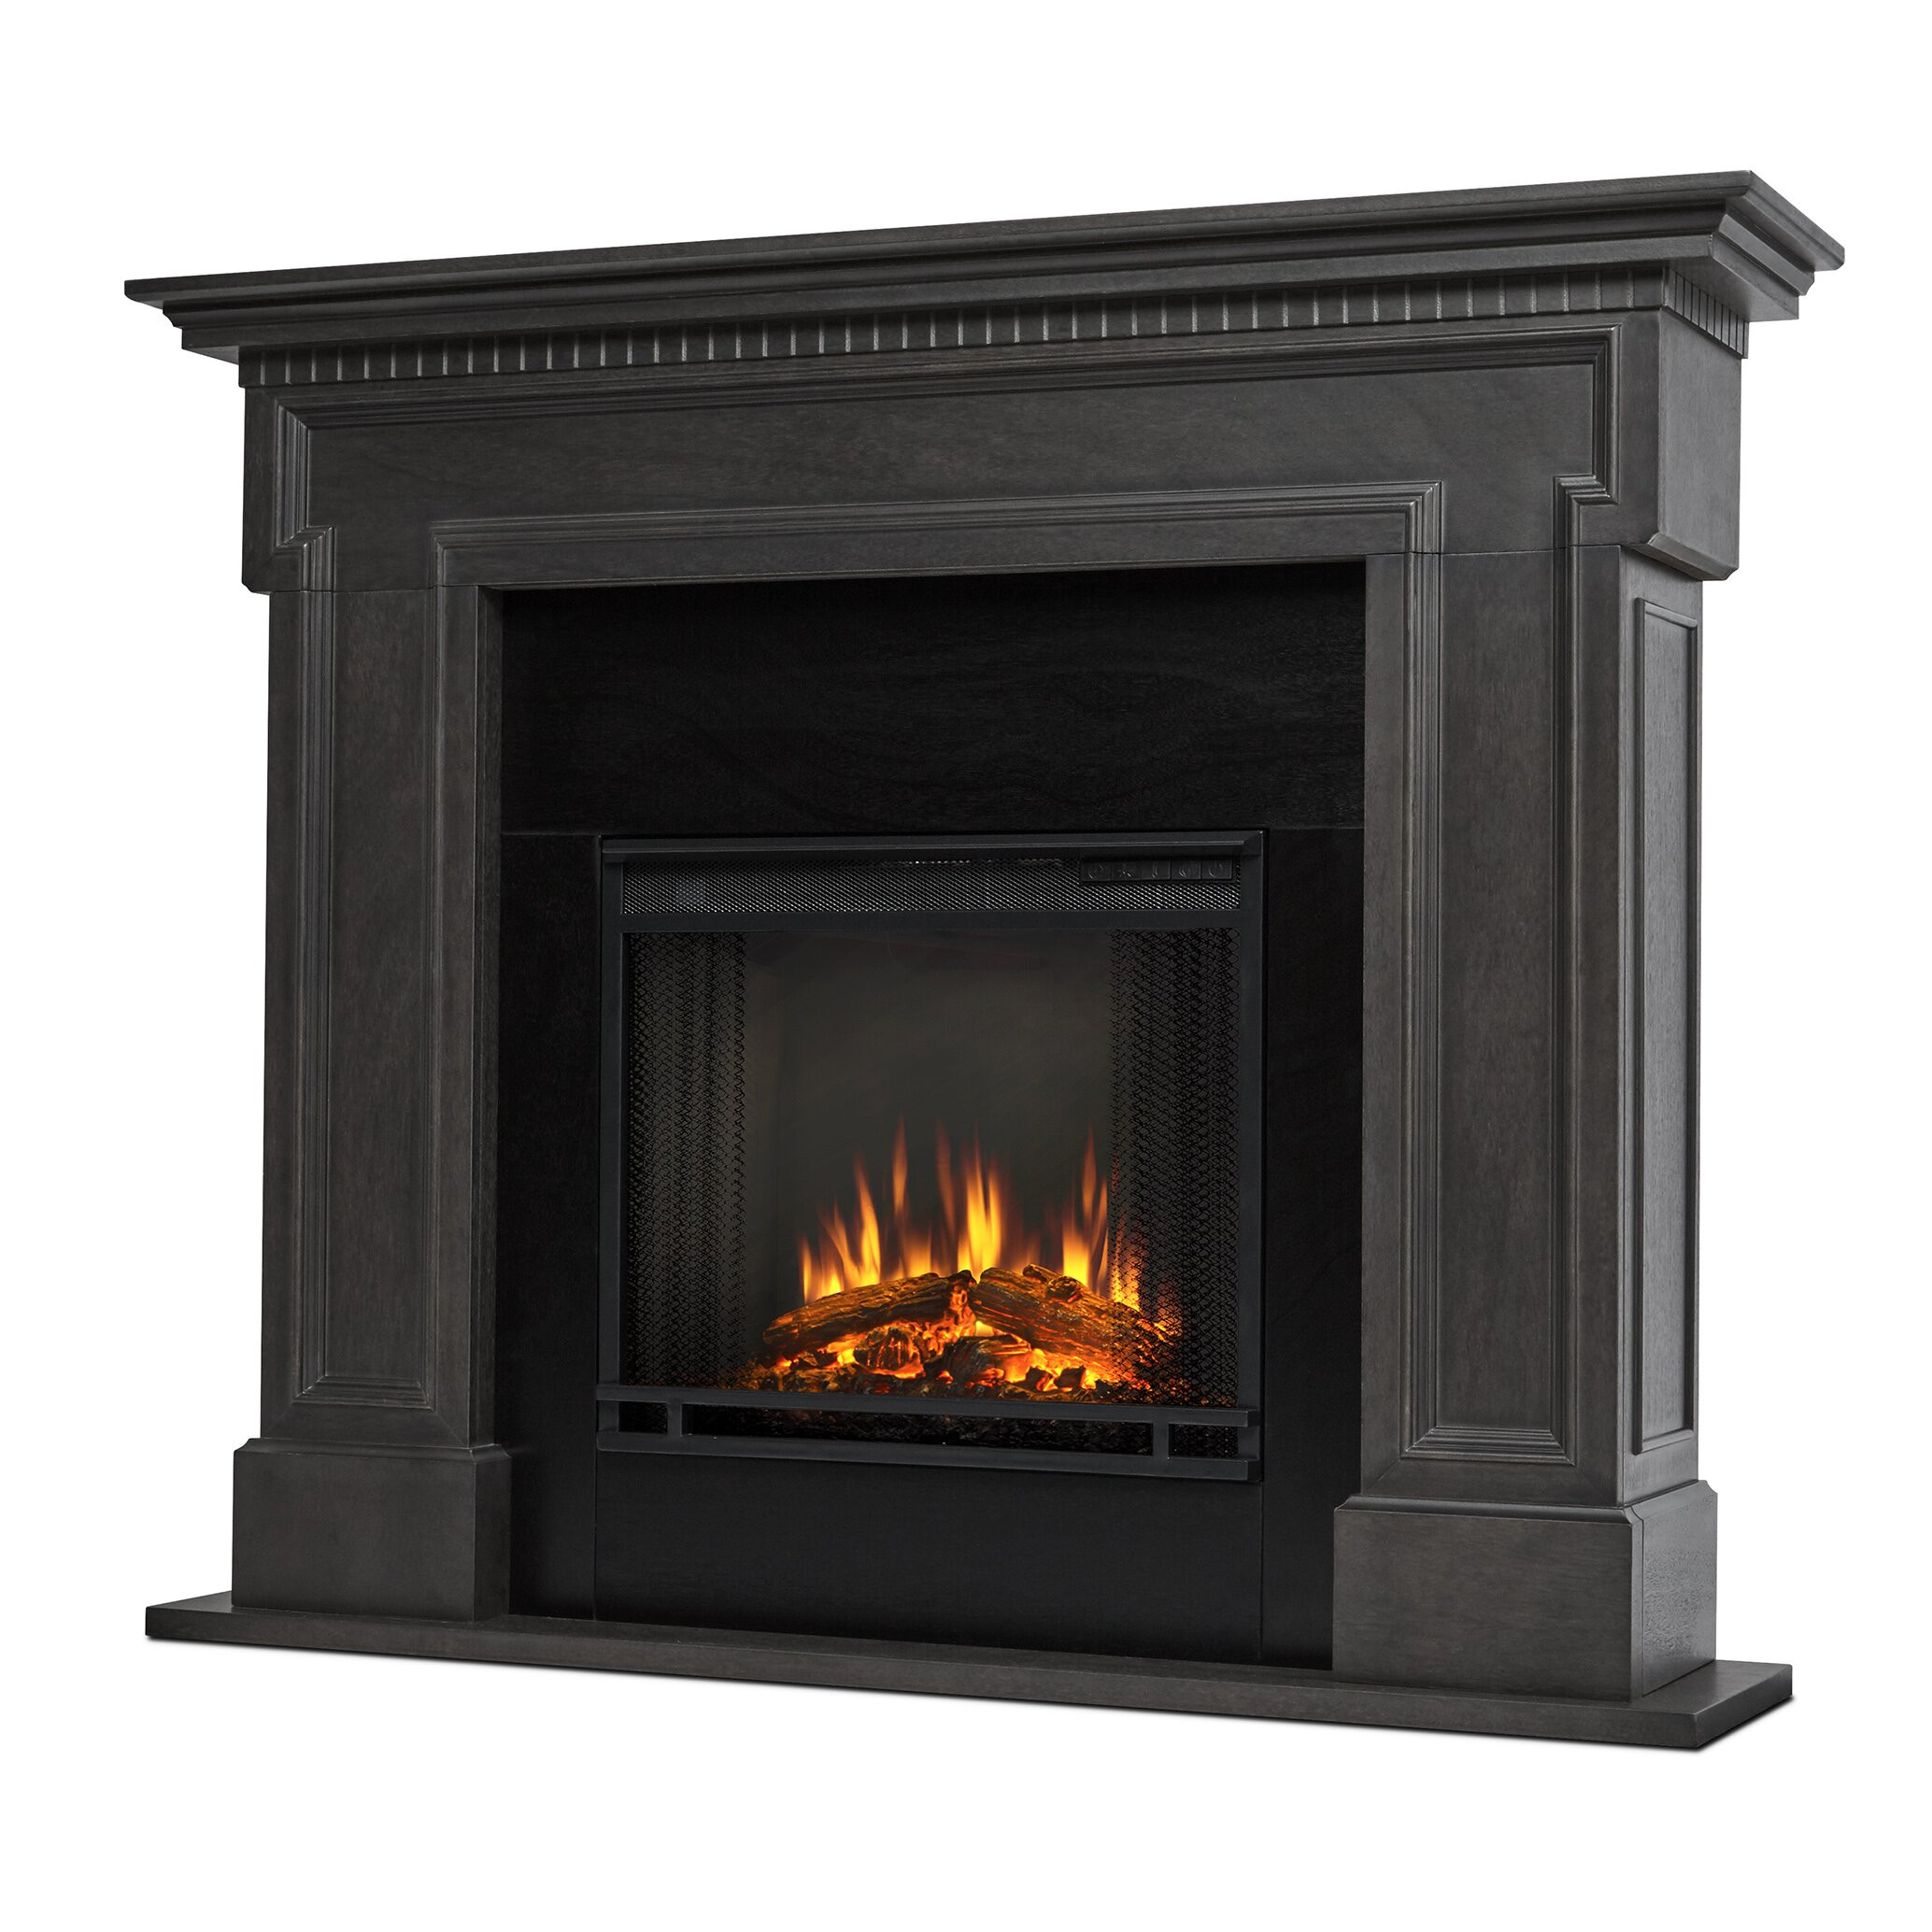 Real Flame Electric Fireplace Reviews
 Real Flame Real Flame Thayer Electric Fireplace & Reviews